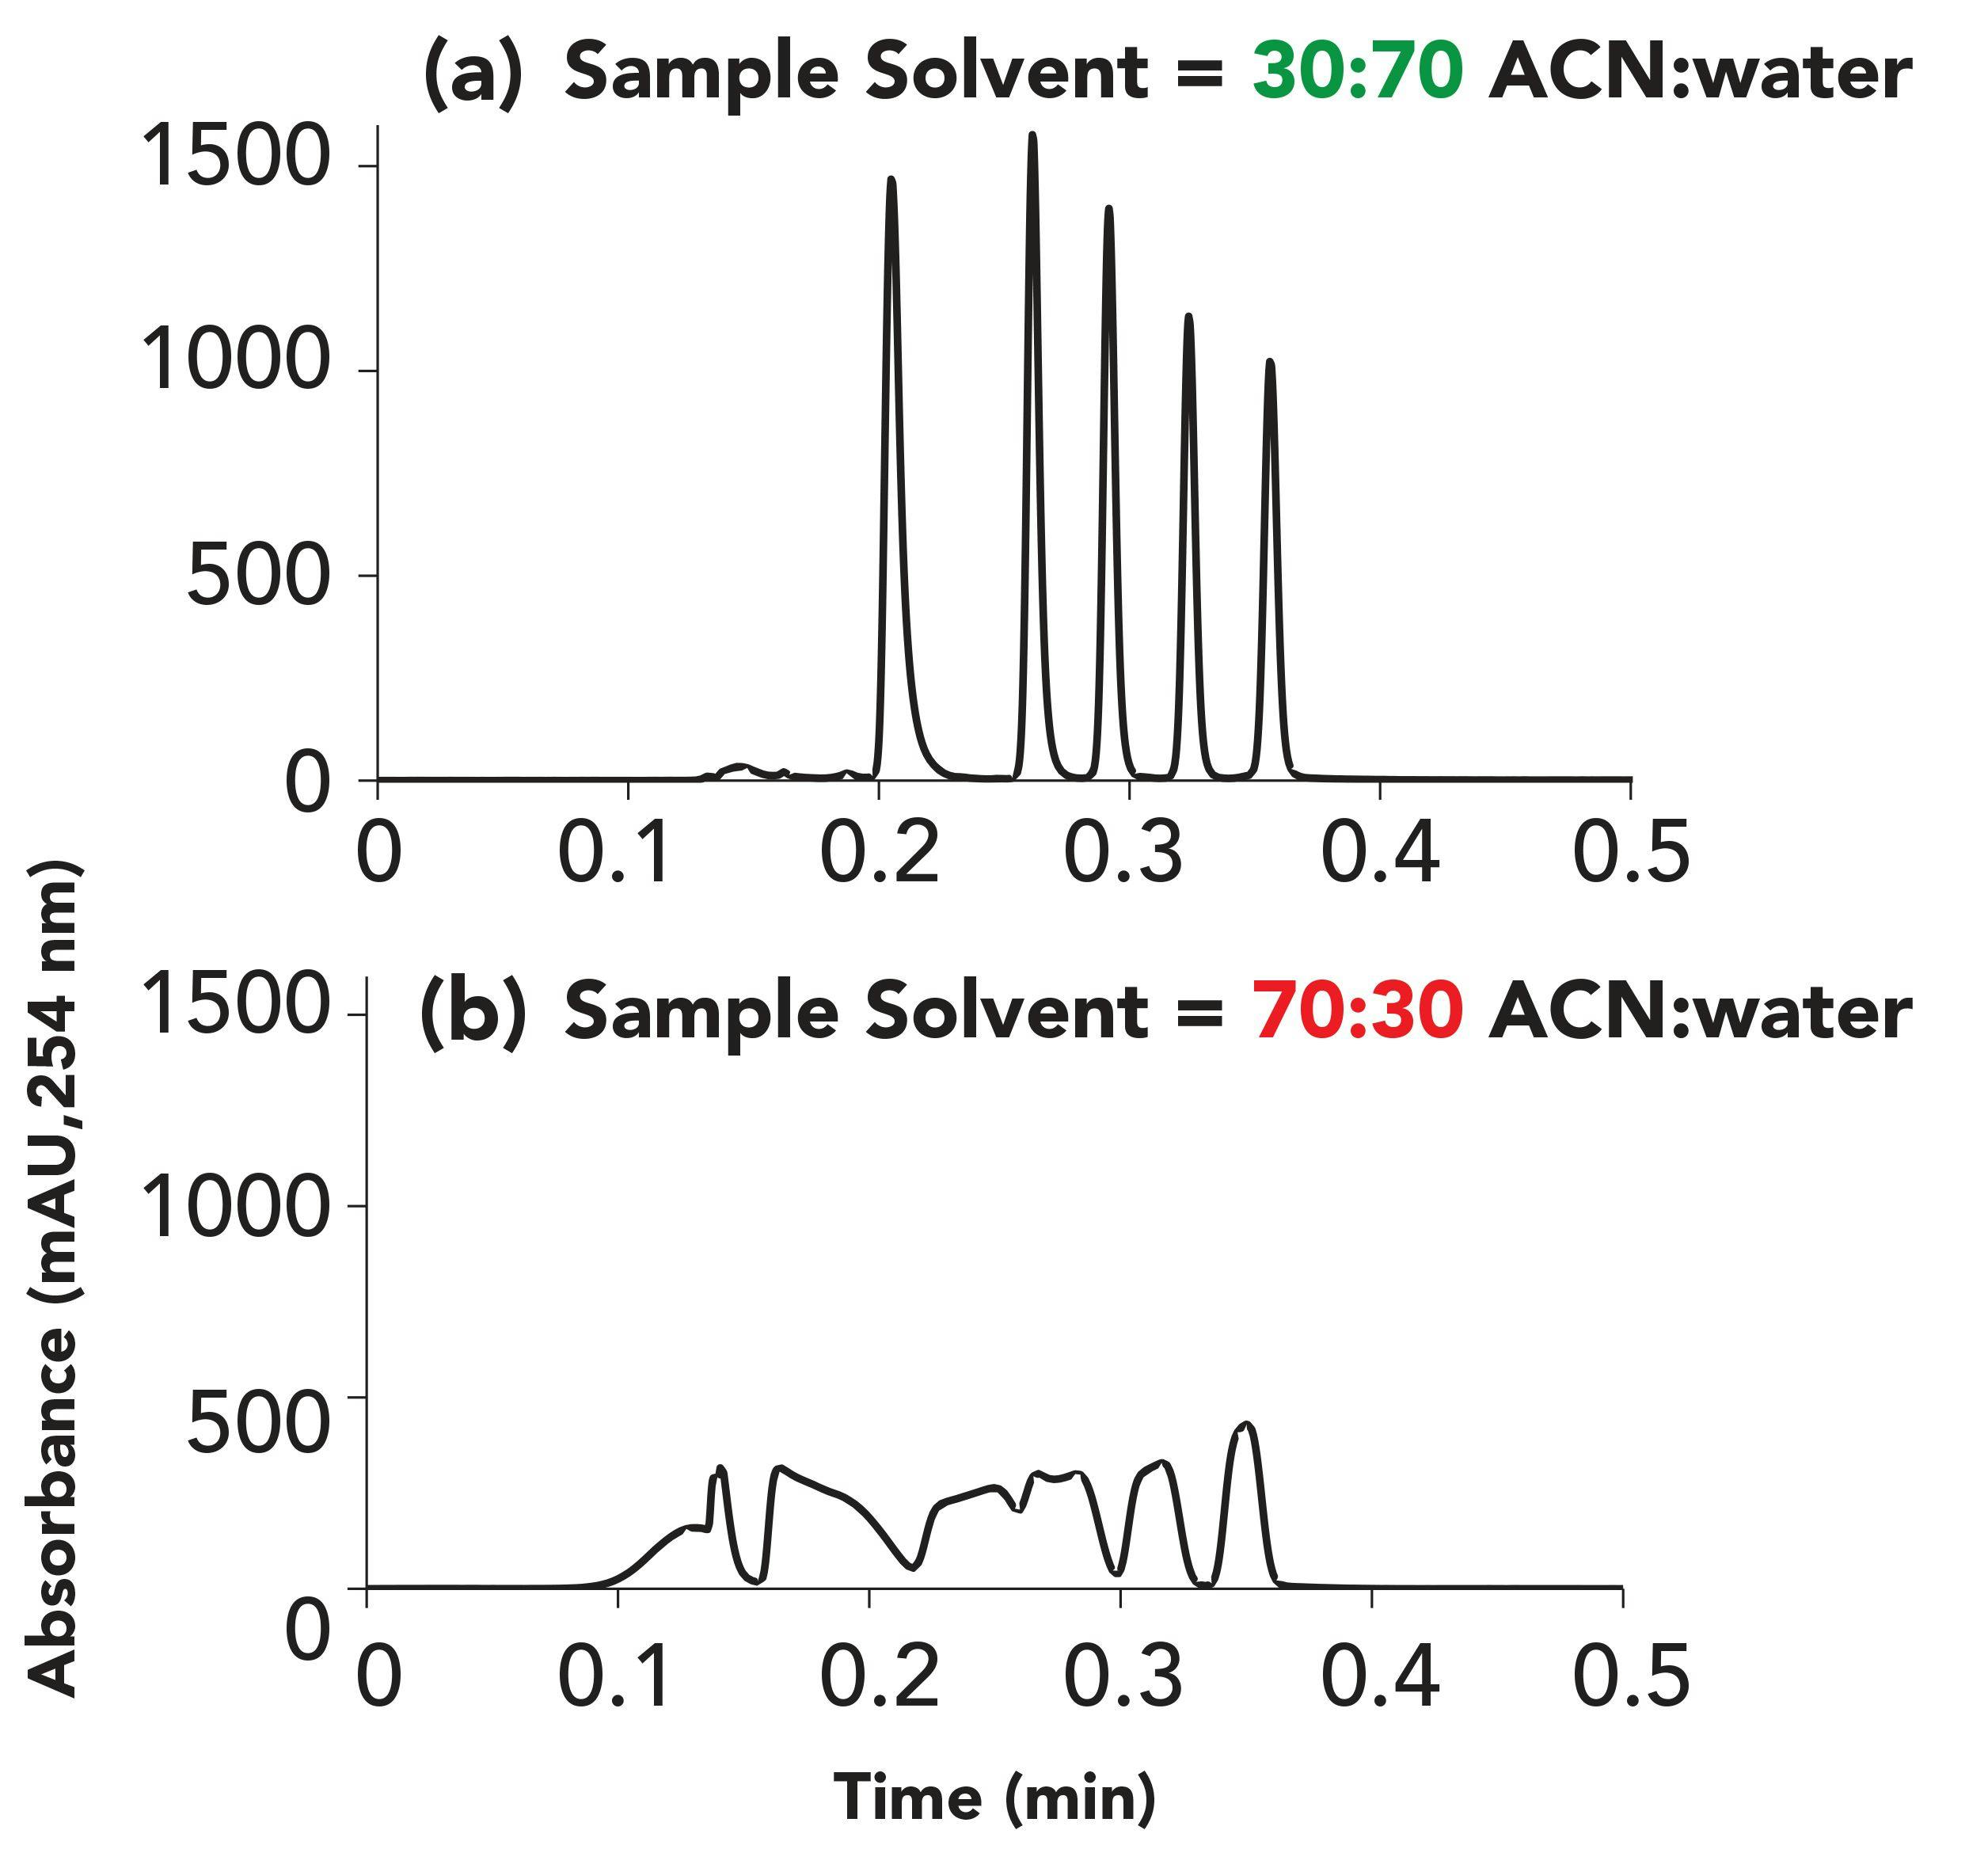 FIGURE 3: Comparison of chromatograms obtained from injection of samples in (a) 30:70 acetonitrile:water, or (b) 70:30 acetonitrile:water. Conditions: column, 30 mm x 2.1 mm i.d. C18; injection volume, 40 μL; gradient elution from 50 to 90% acetonitrile from 0–15 s, with water as the aqueous phase; flow rate, 2.5 mL/min. Analytes are alkylphenone homologs from acetophenone to hexanophenone. ACN = acetonitrile. For both subfigures, x-axis is Time (min), and y-axis is Absorbance (mAU at 254 nm).